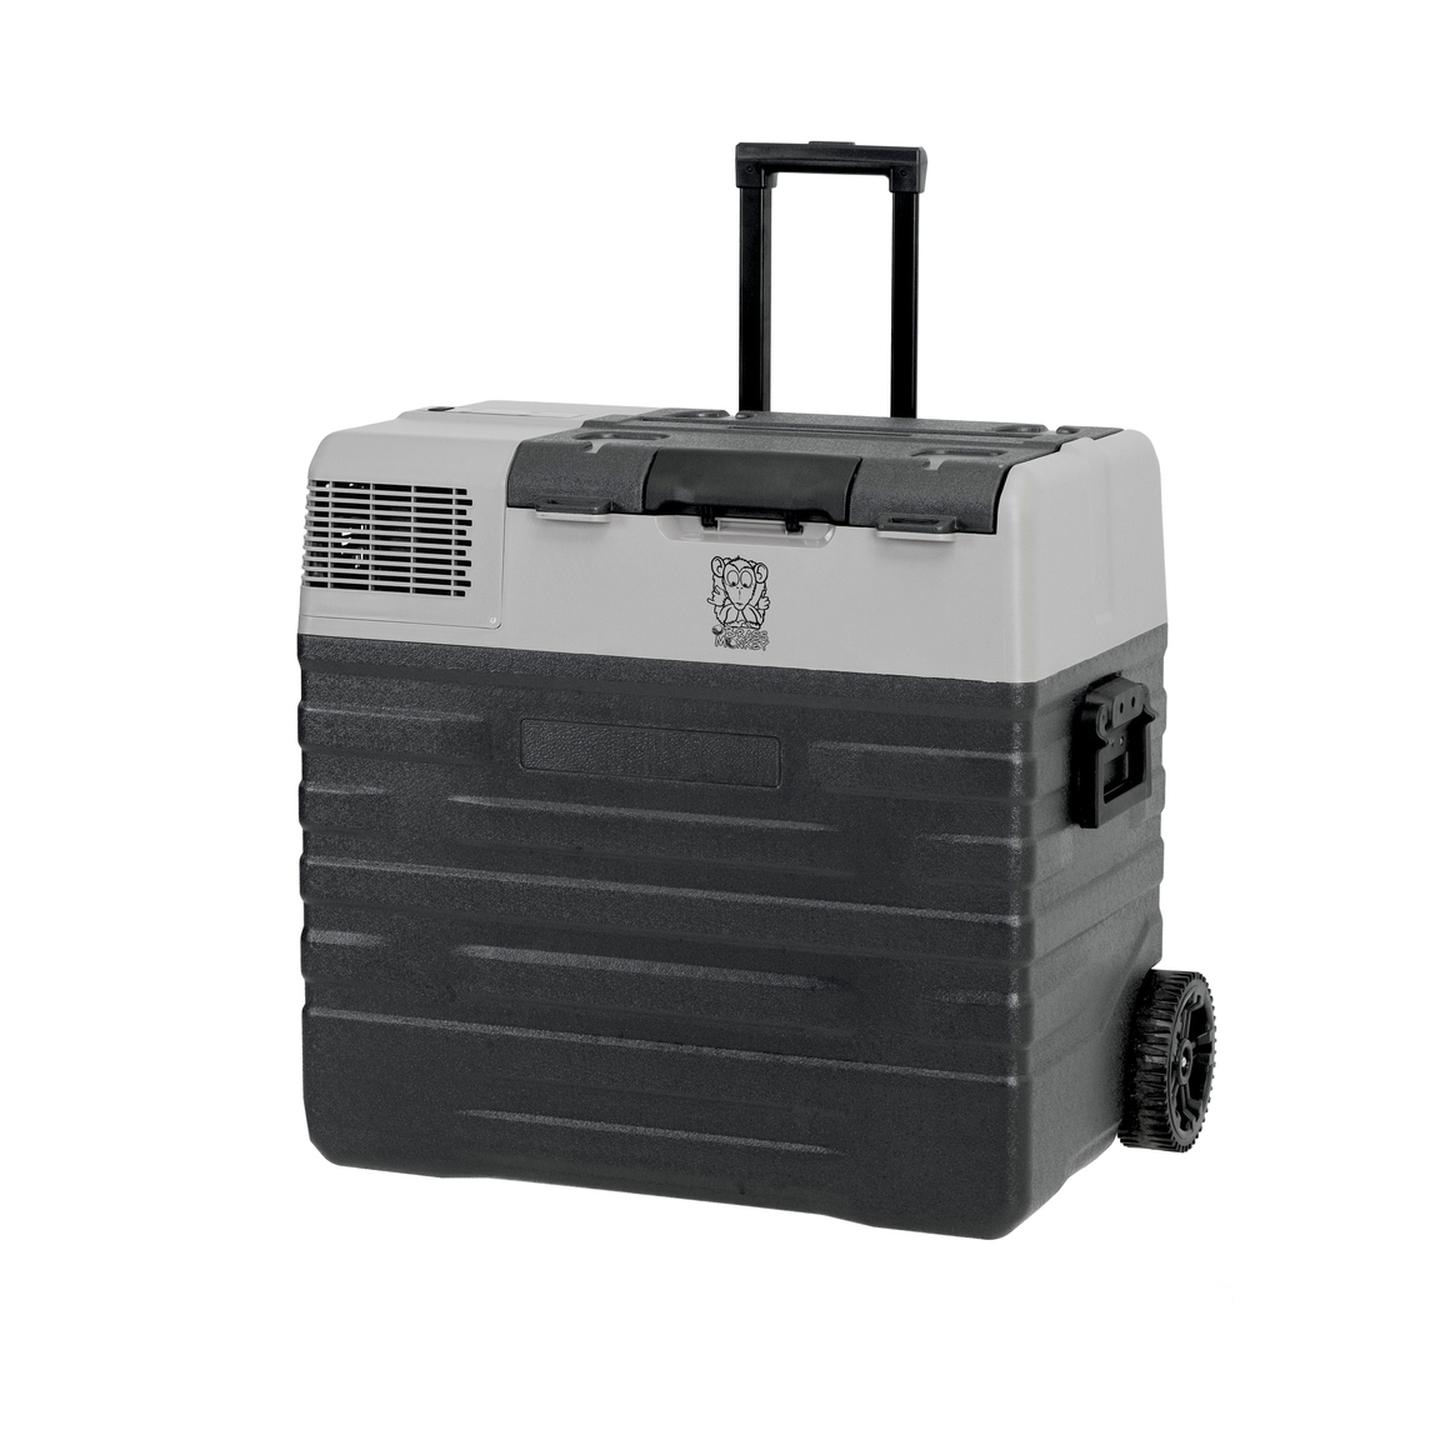 62L Brass Monkey Ultra-Portable Fridge/Freezer with Wheels and Battery Compartment